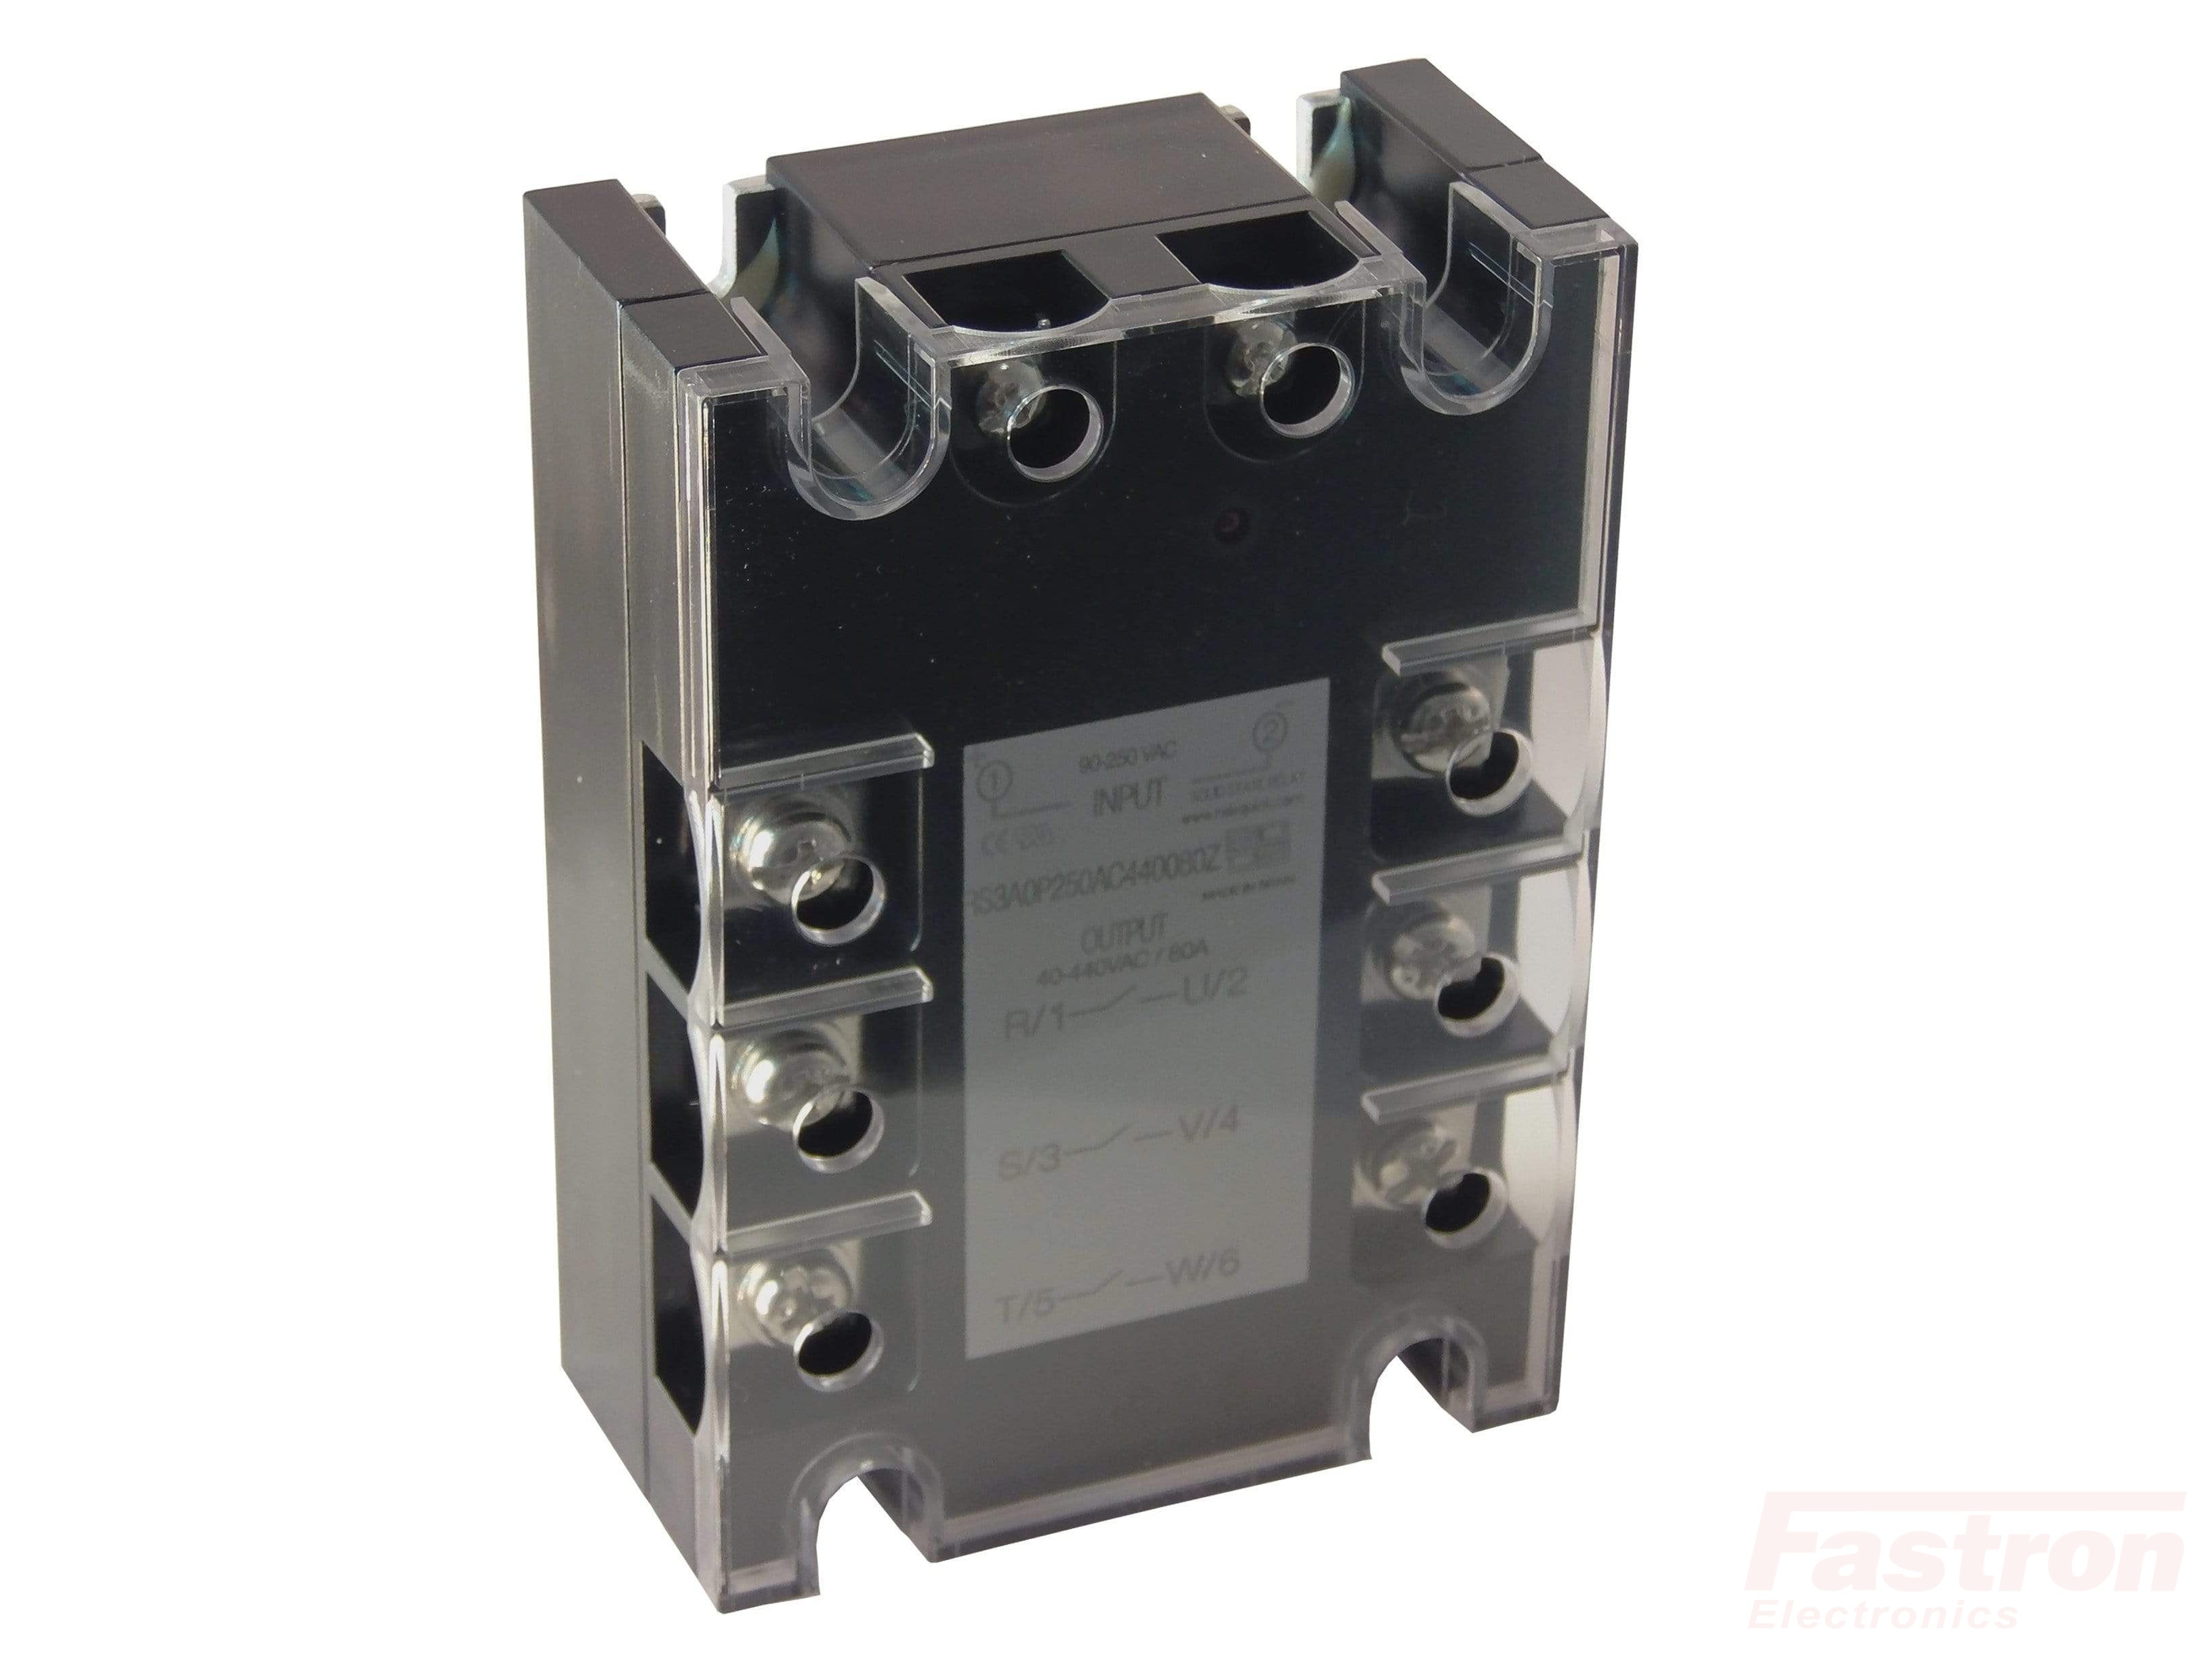 RS3A0P032DC480120Z, 3 Phase Solid Sate Relay, 480VAC, 120 Amps per phase